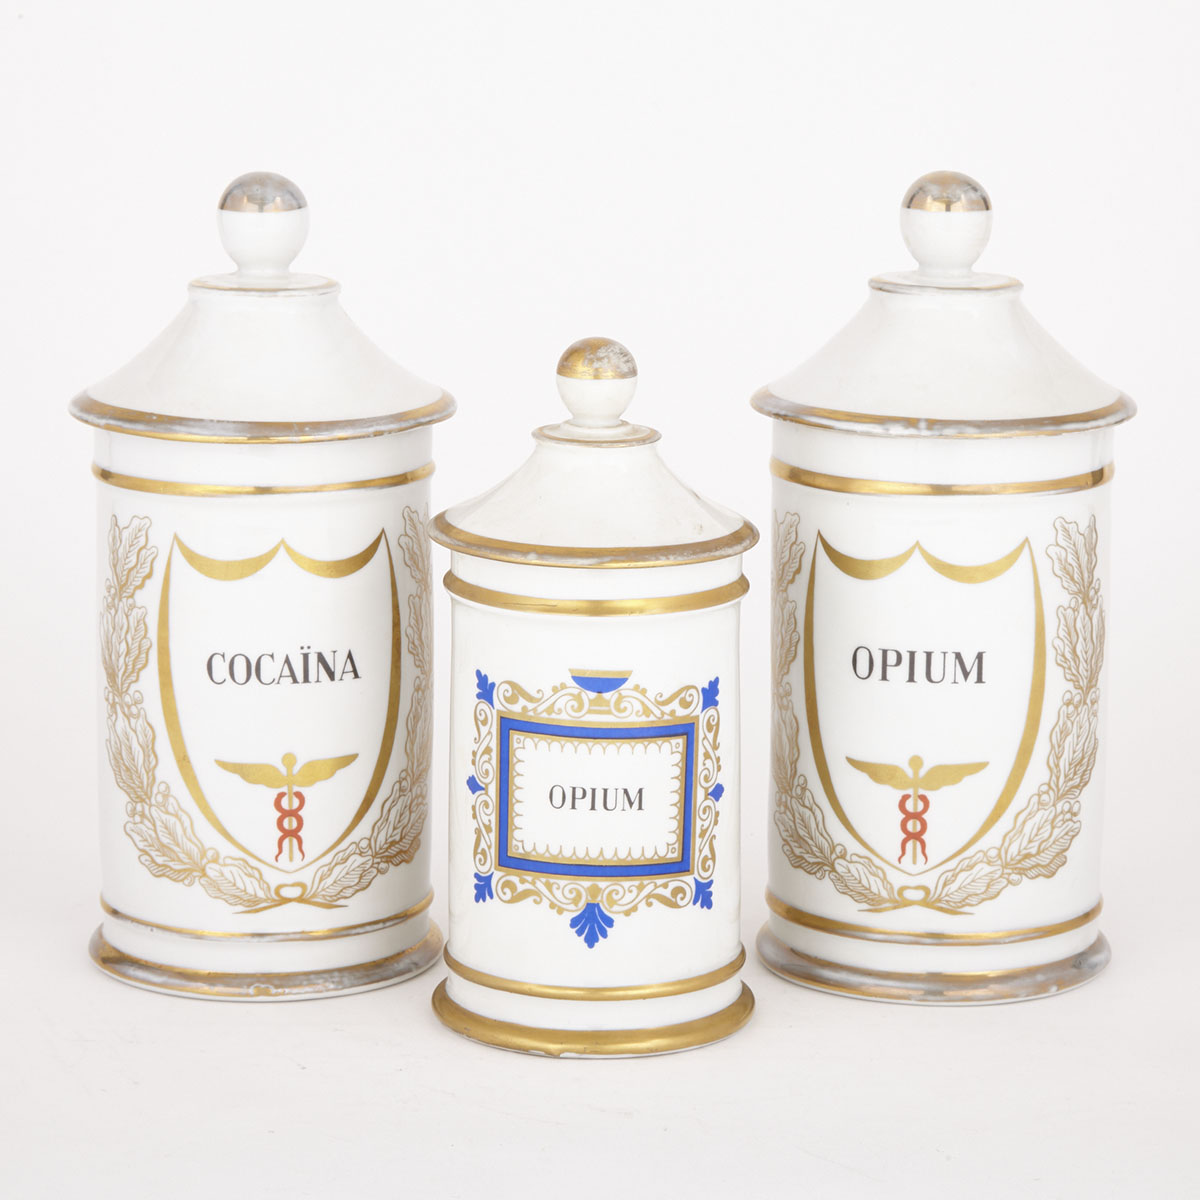 Thee French Porcelain Apothecary Jars, 20th century